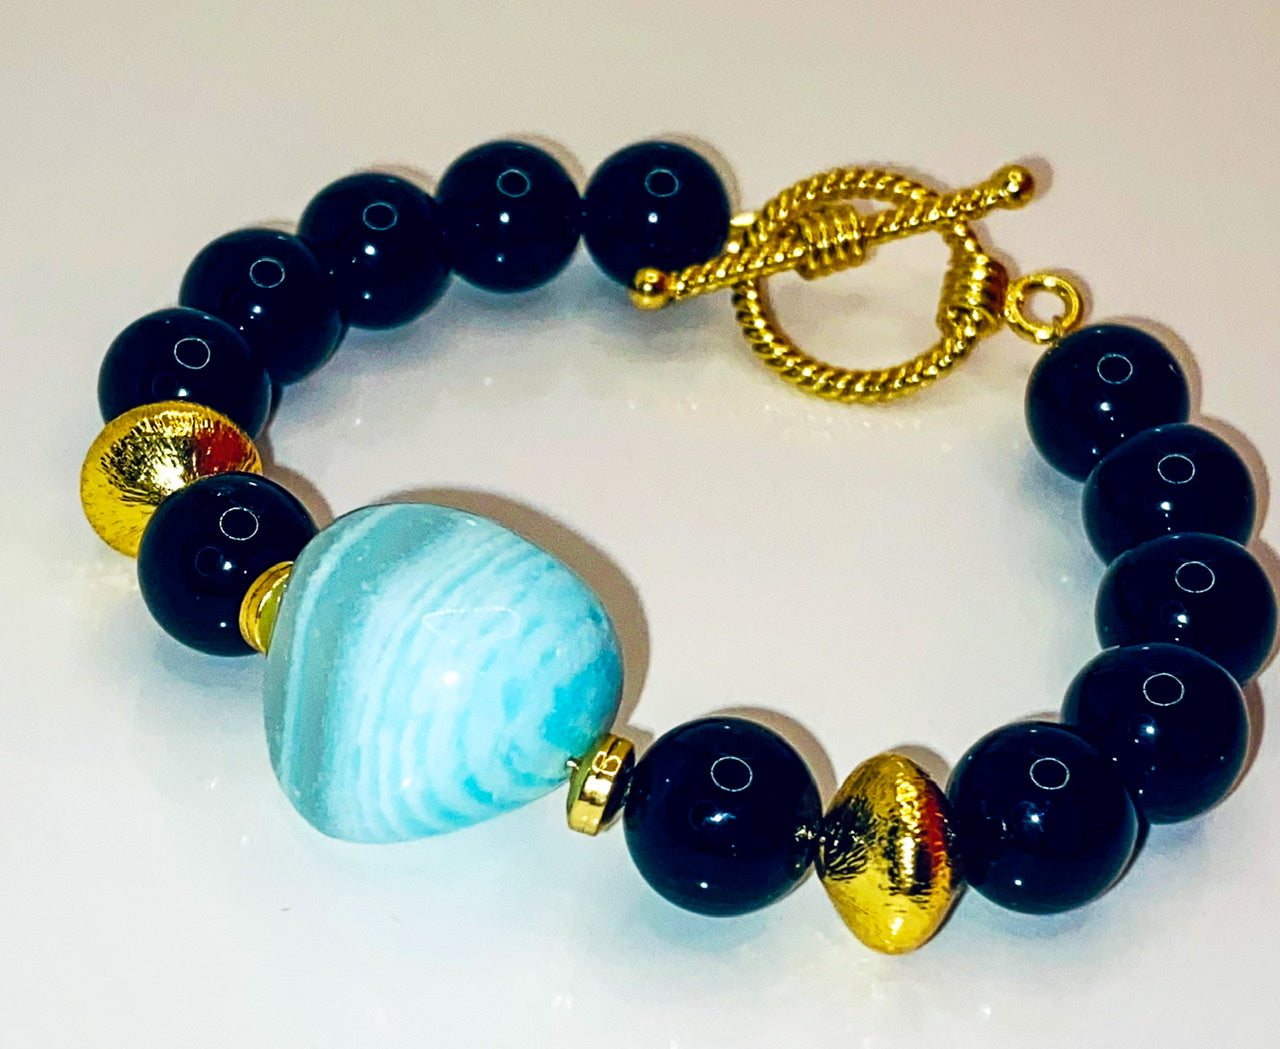 Gorgeous Vibrant Blue Opal and Black Onyx Gemstones with Brushed Gold Vermeil Statement Bracelet